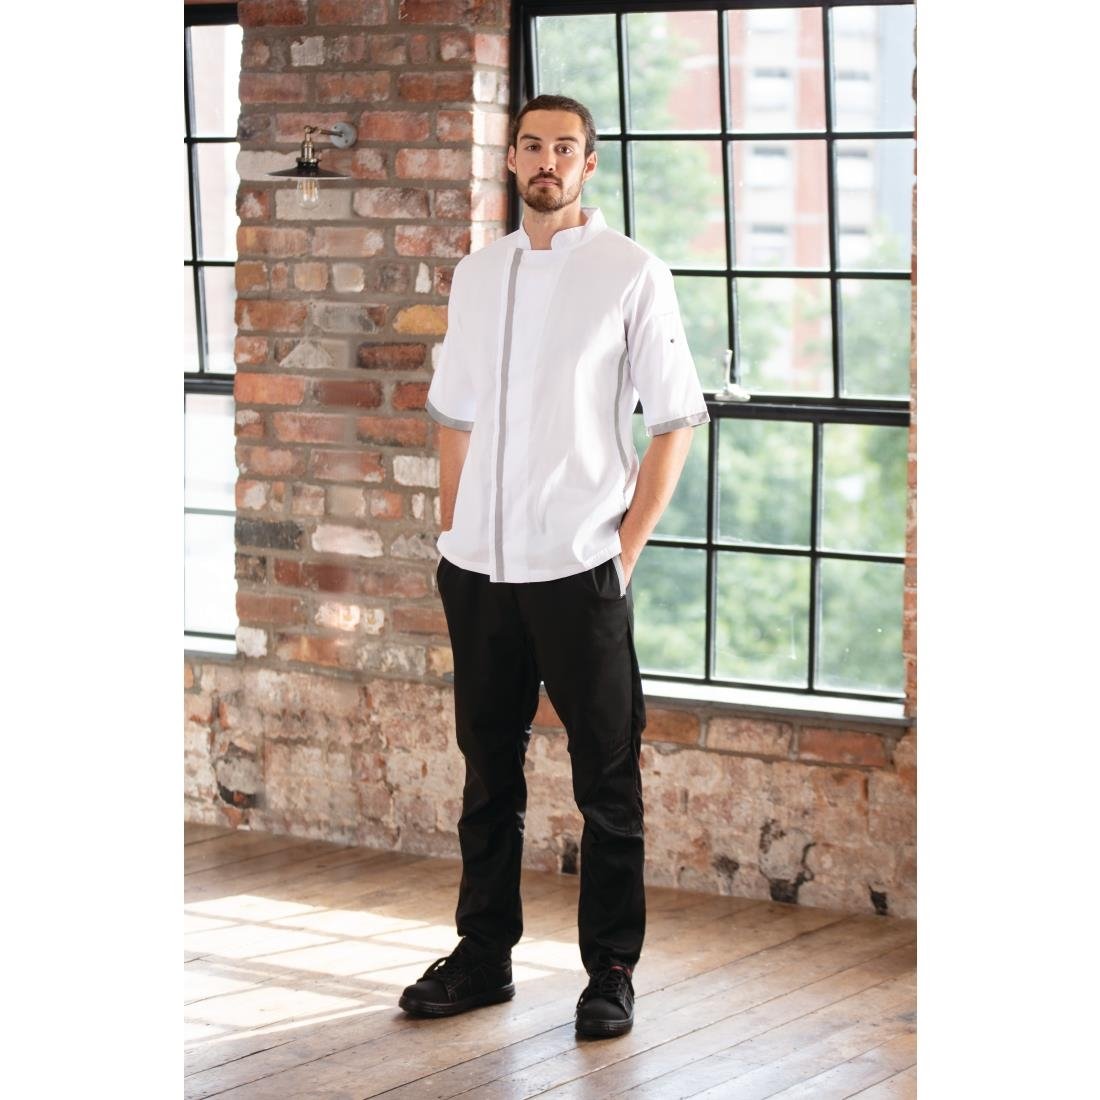 B998-XS Southside Unisex Chefs Jacket Short Sleeve White XS JD Catering Equipment Solutions Ltd